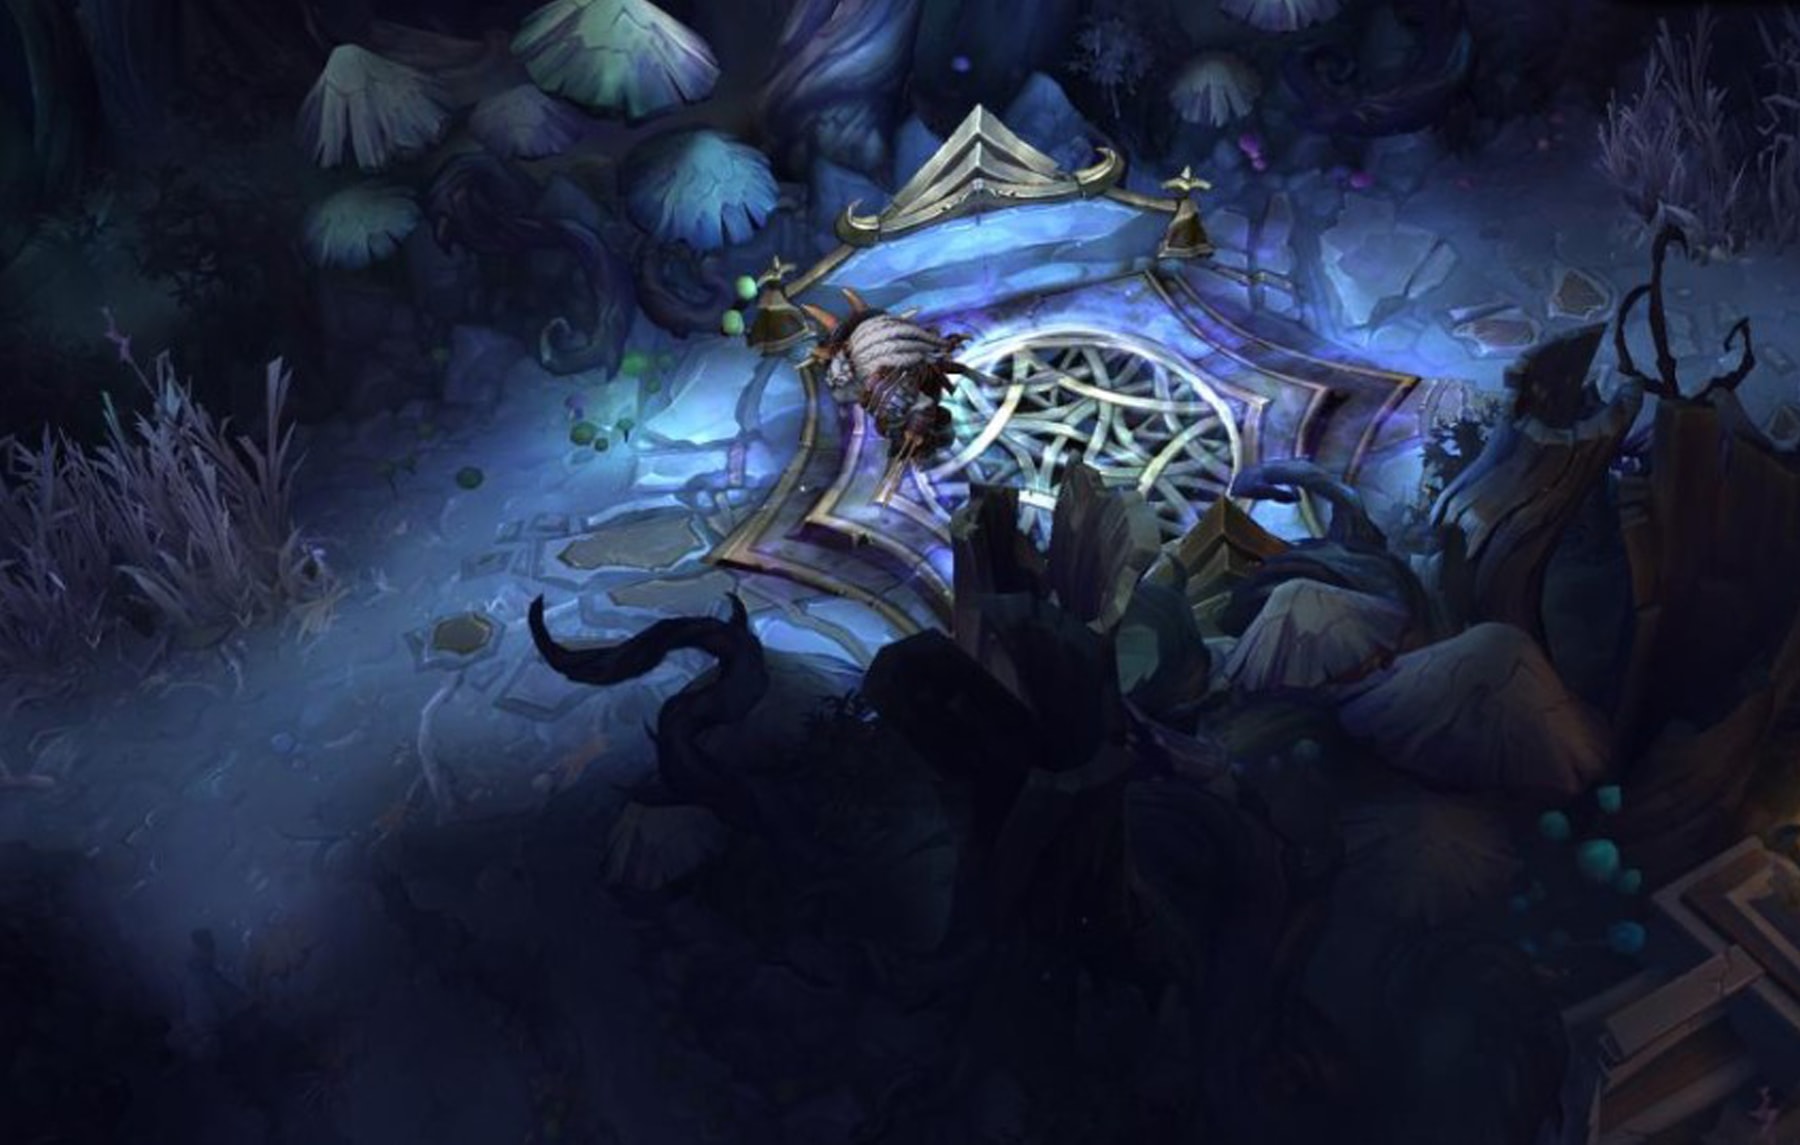 A darkened forest in the Twisted Treeline map from League of Legends